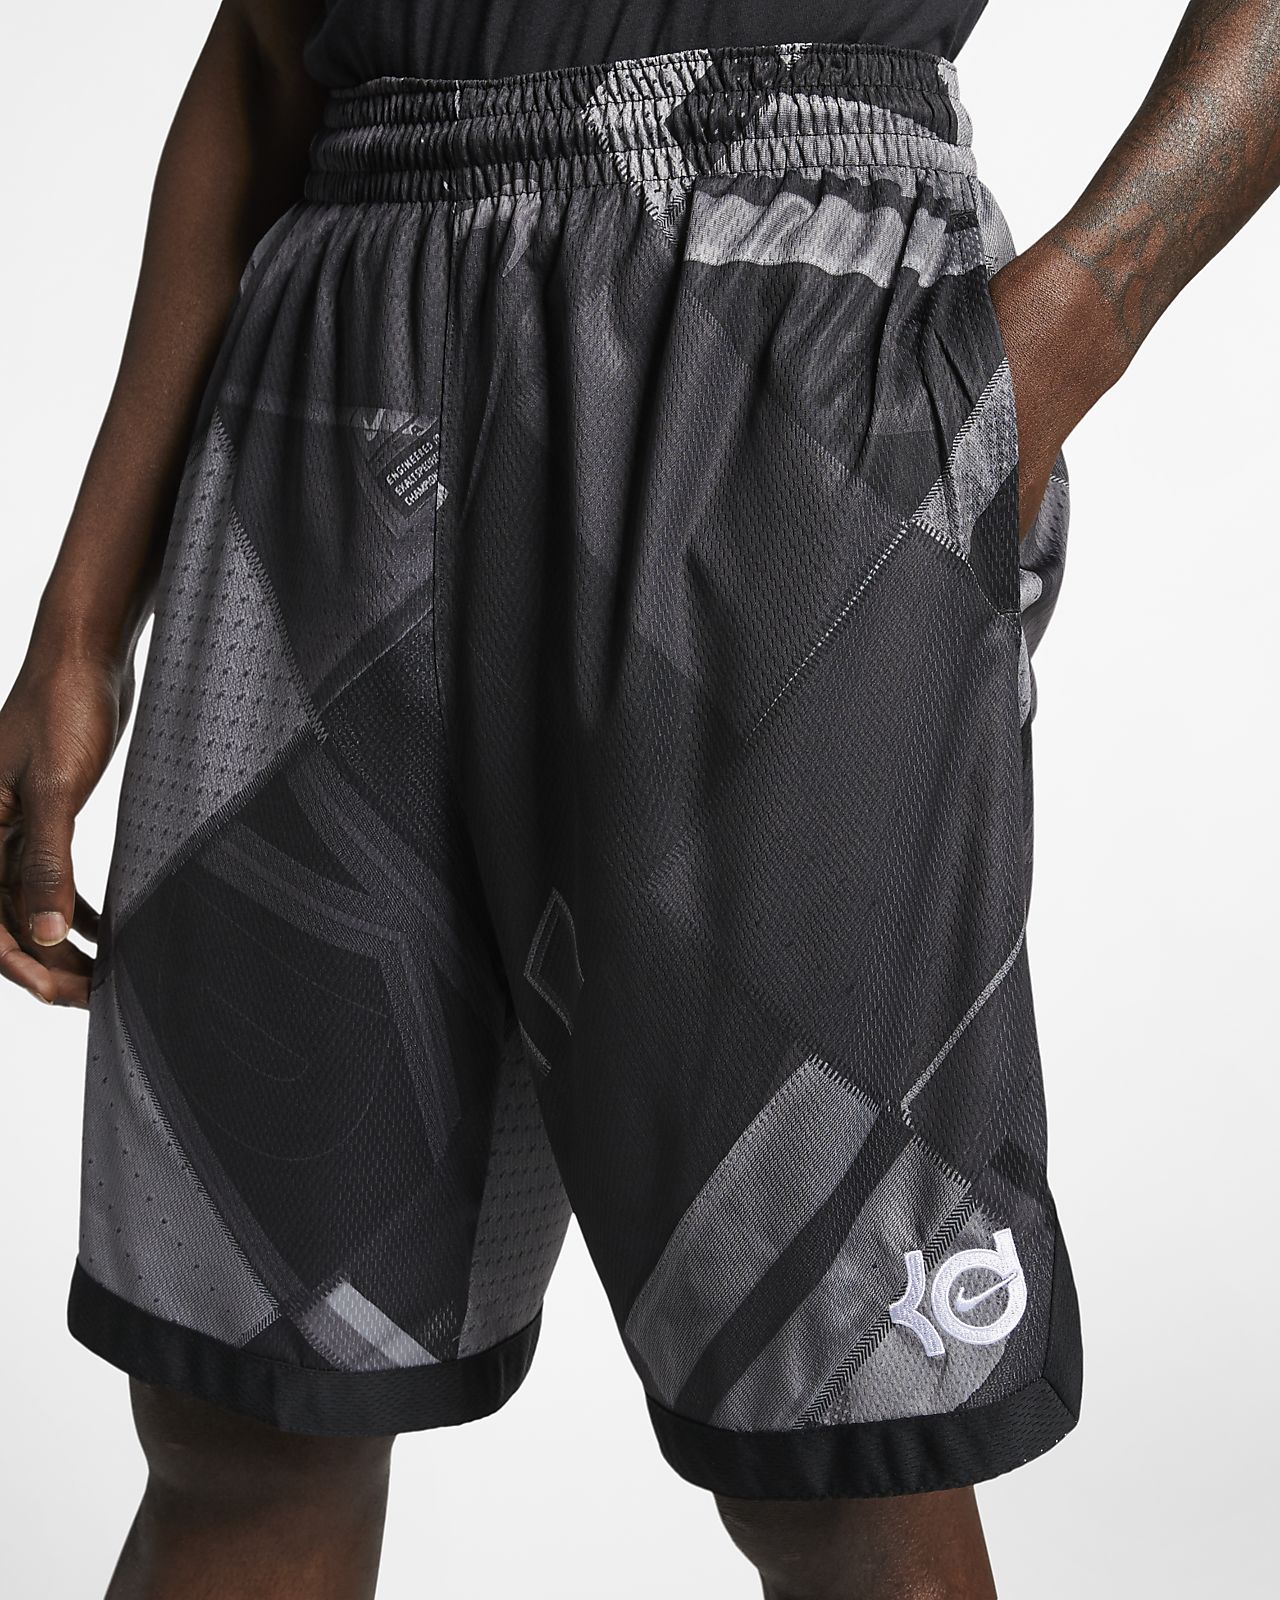 kd shorts mens Online Shopping for 